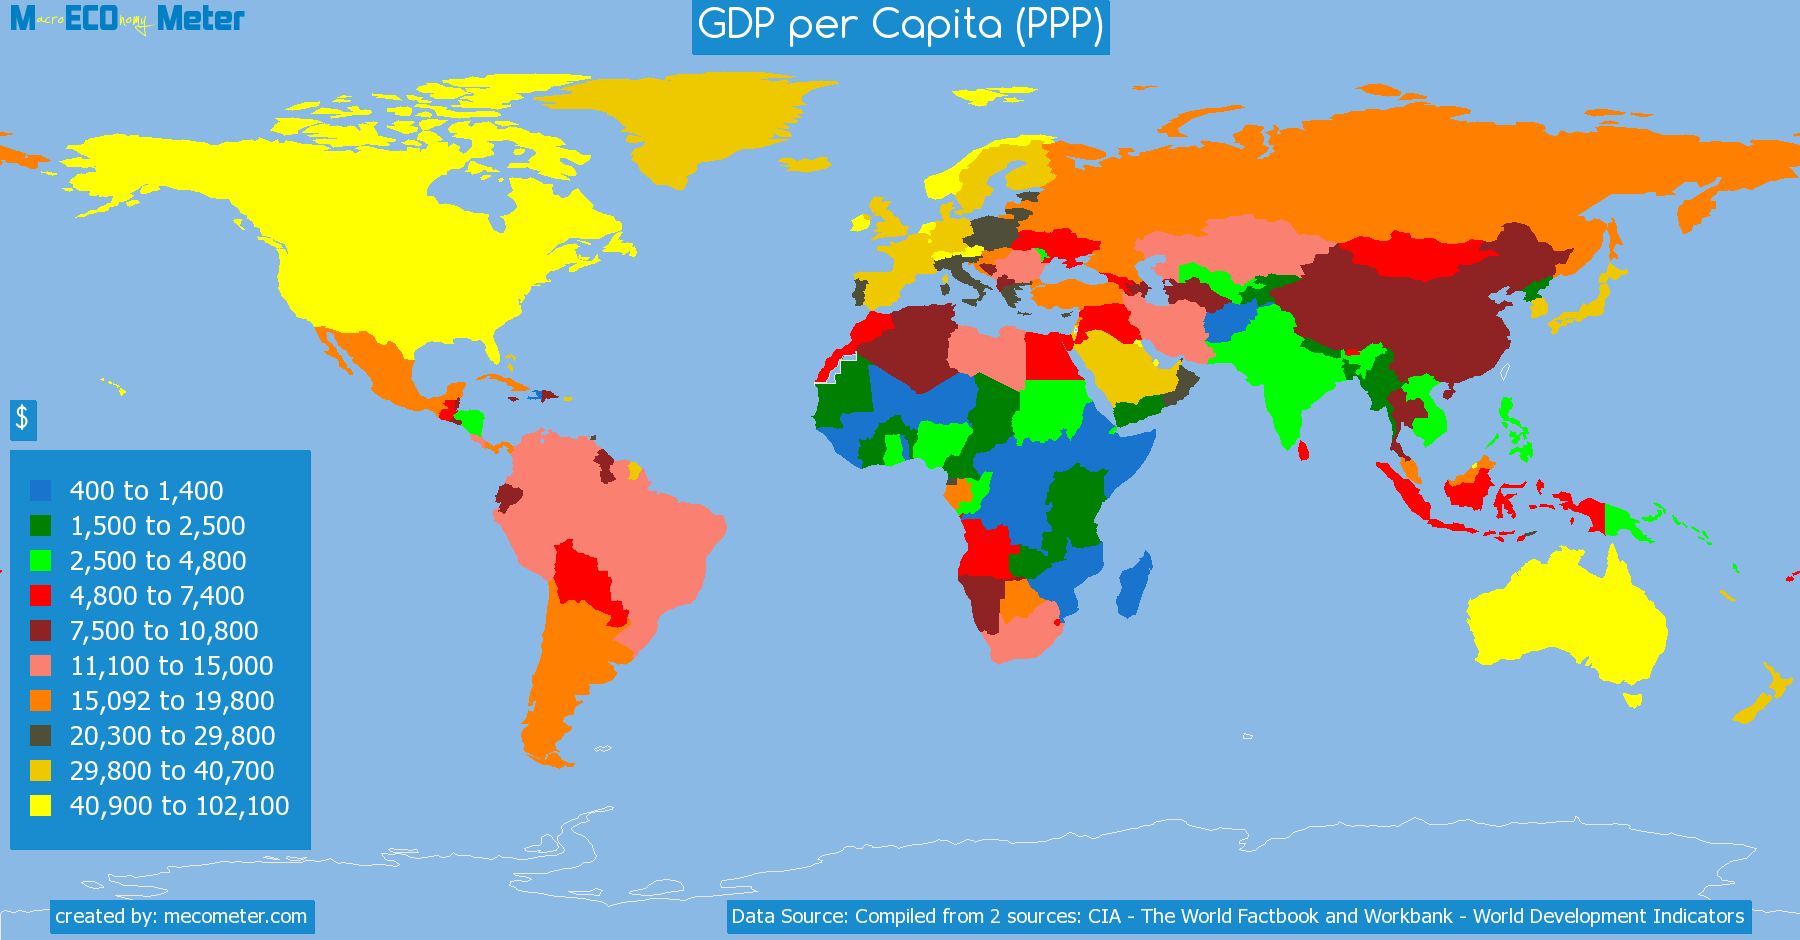 list of countries by GDP per Capita (PPP)